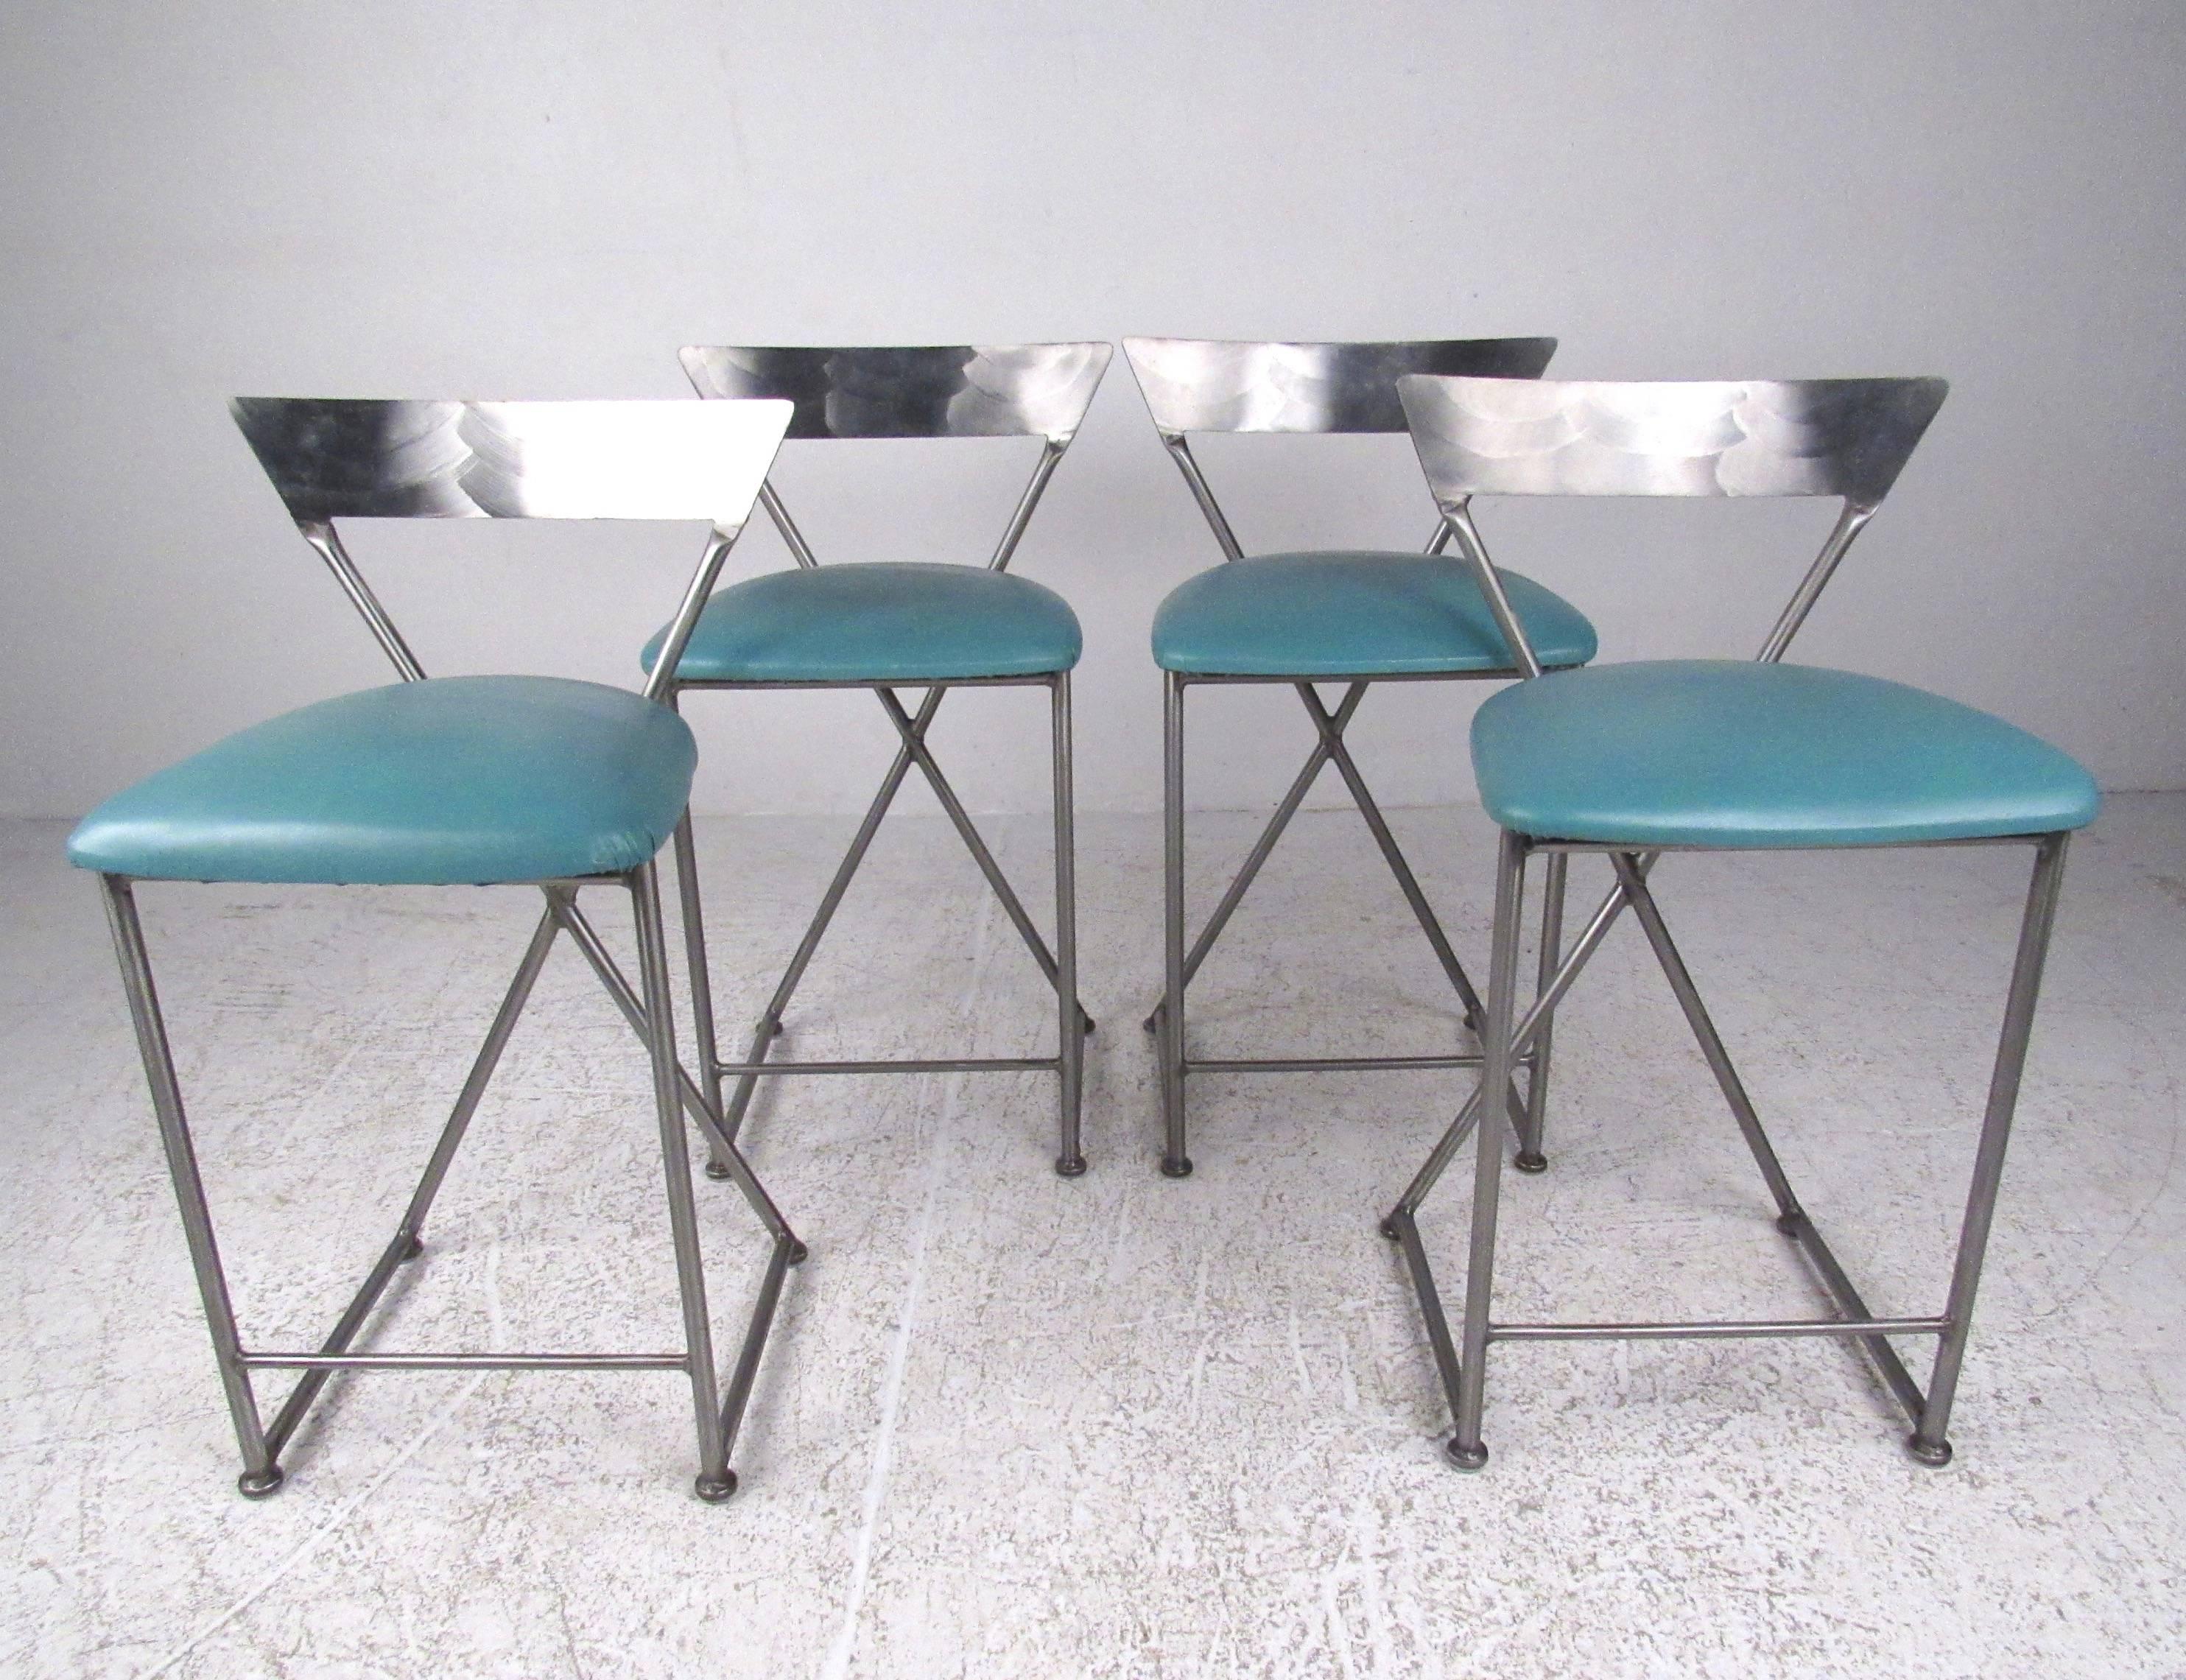 This stylish set of vintage modern bar stools by Shaver-Howard feature teal vinyl upholstery and shapely seat design. Textured stainless steel finish adds midcentury industrial flare to home or office counter seating. This impressive matching set of